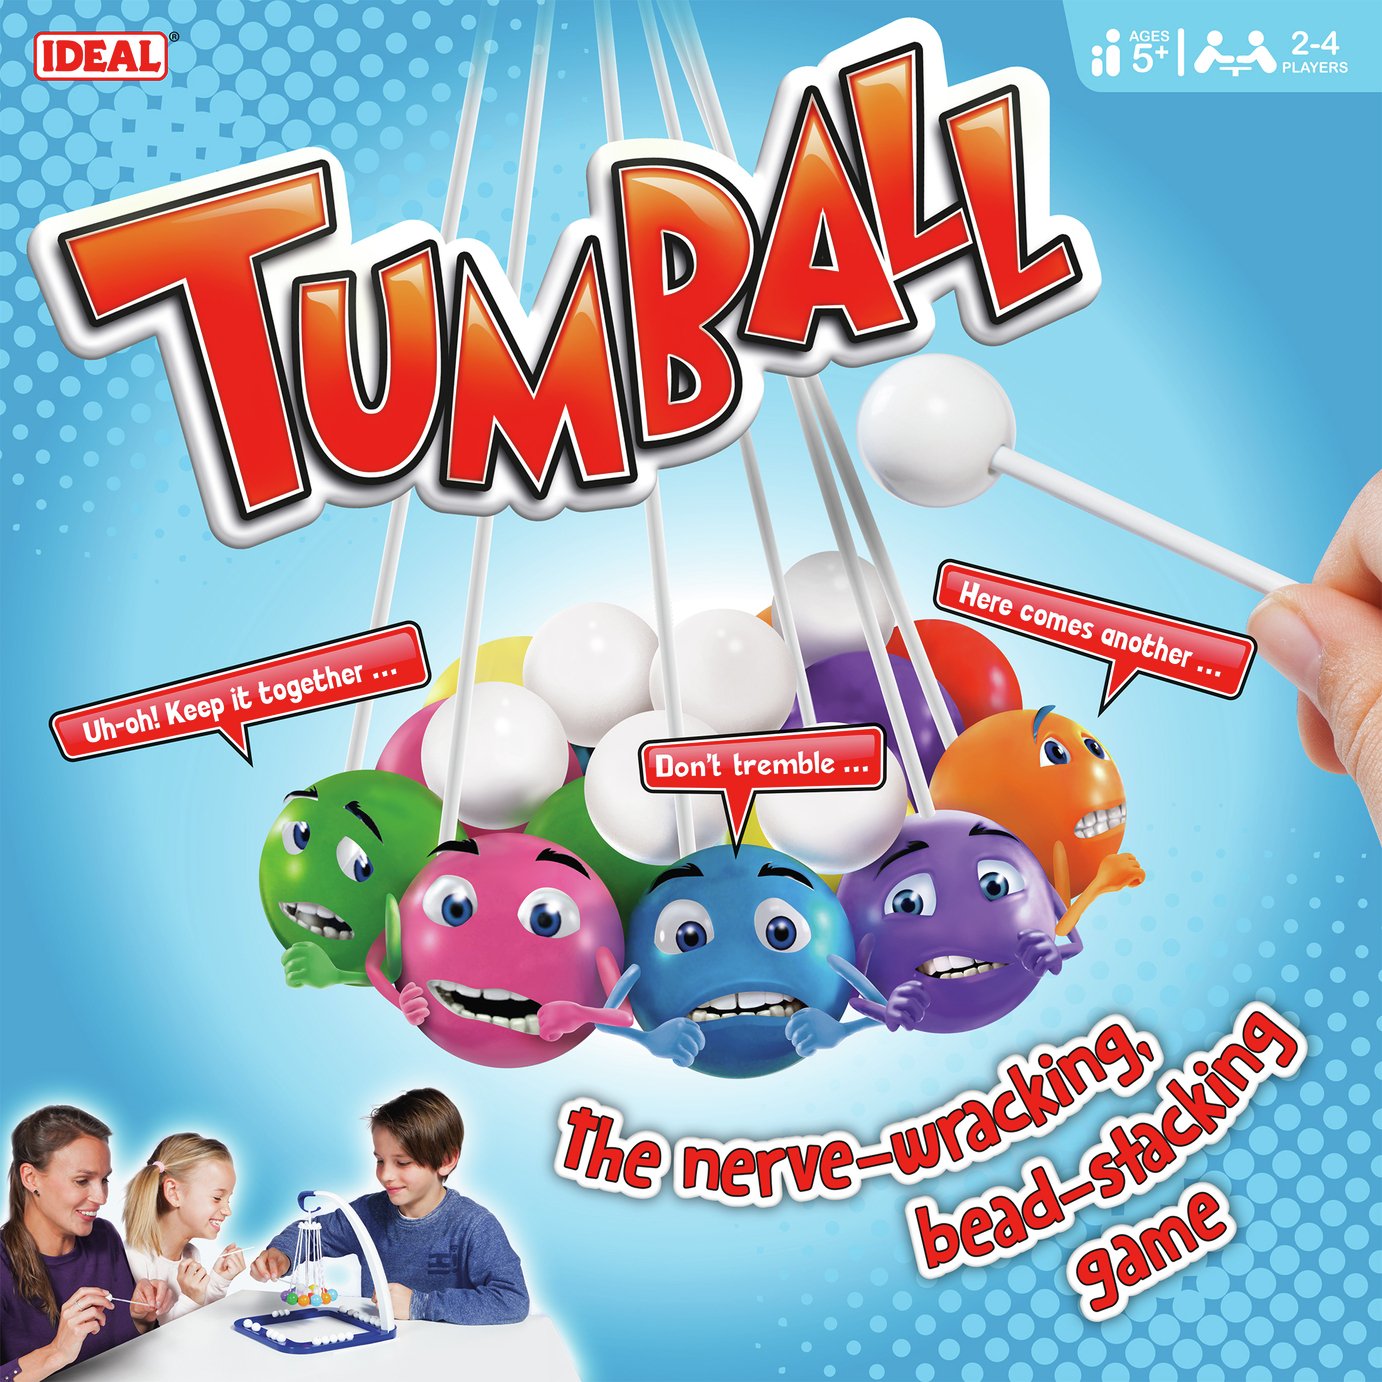 Ideal Tumball Bead-Stacking Game review